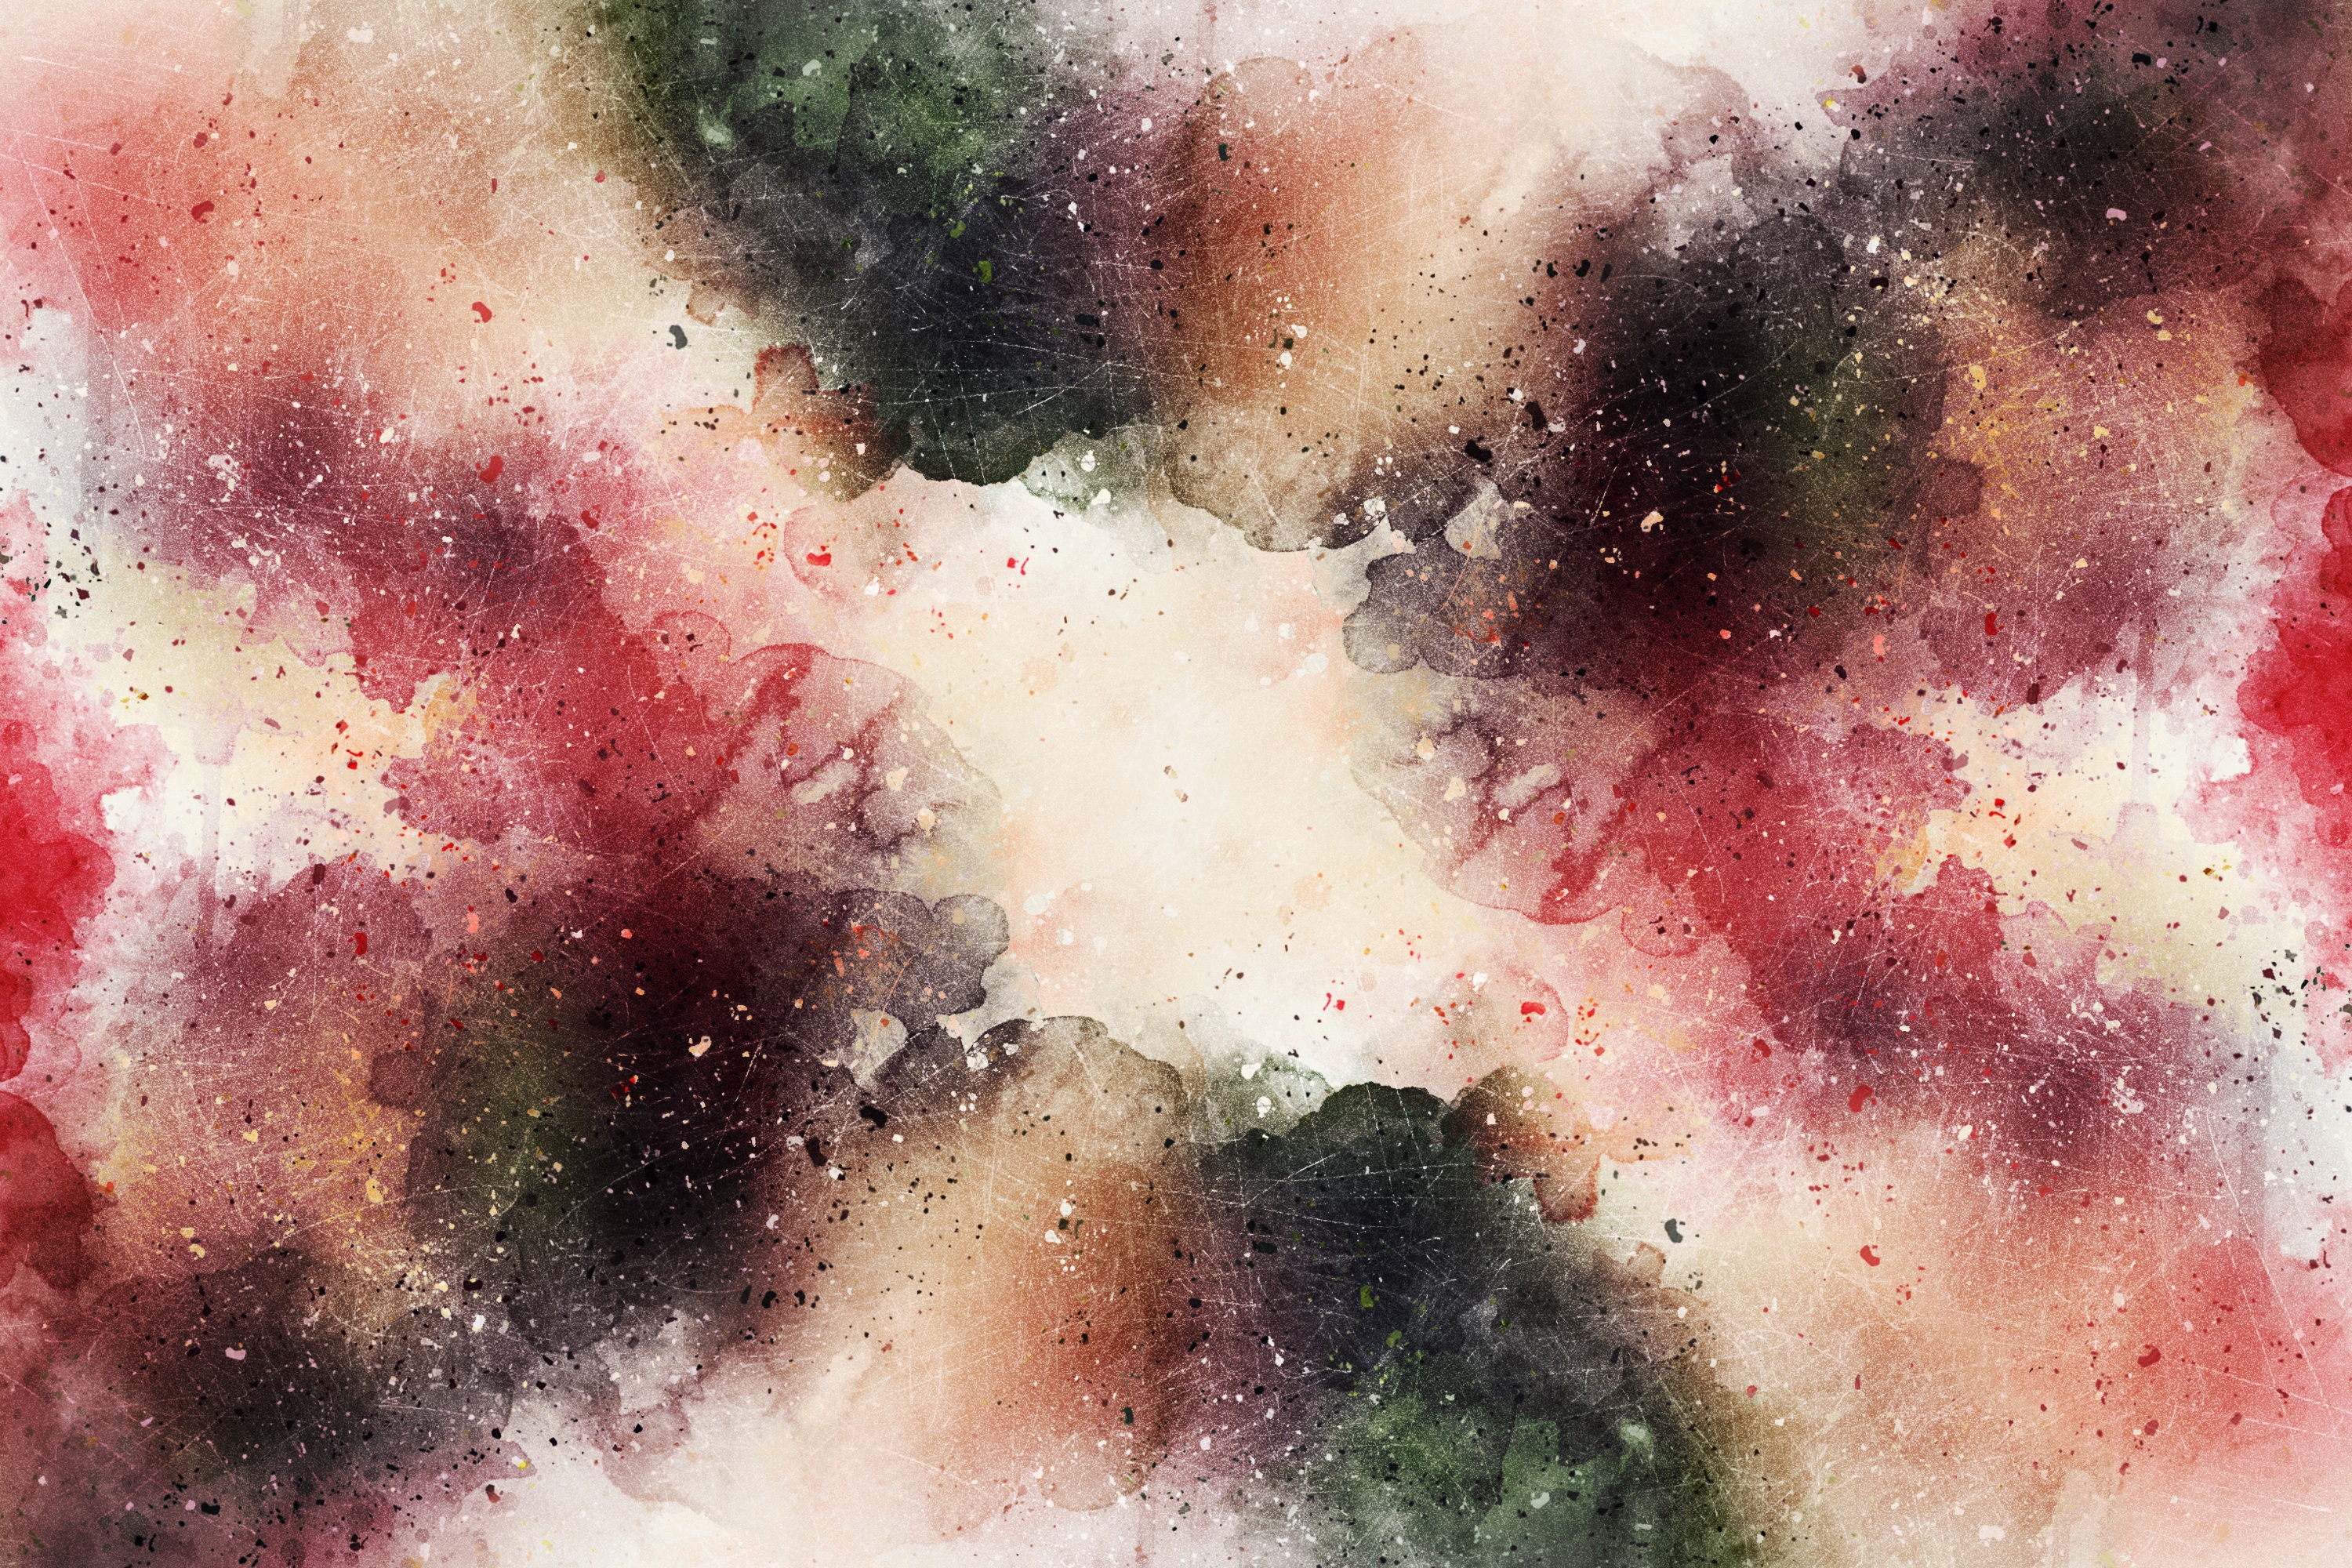 stains, spots, abstract, watercolor Desktop Wallpaper